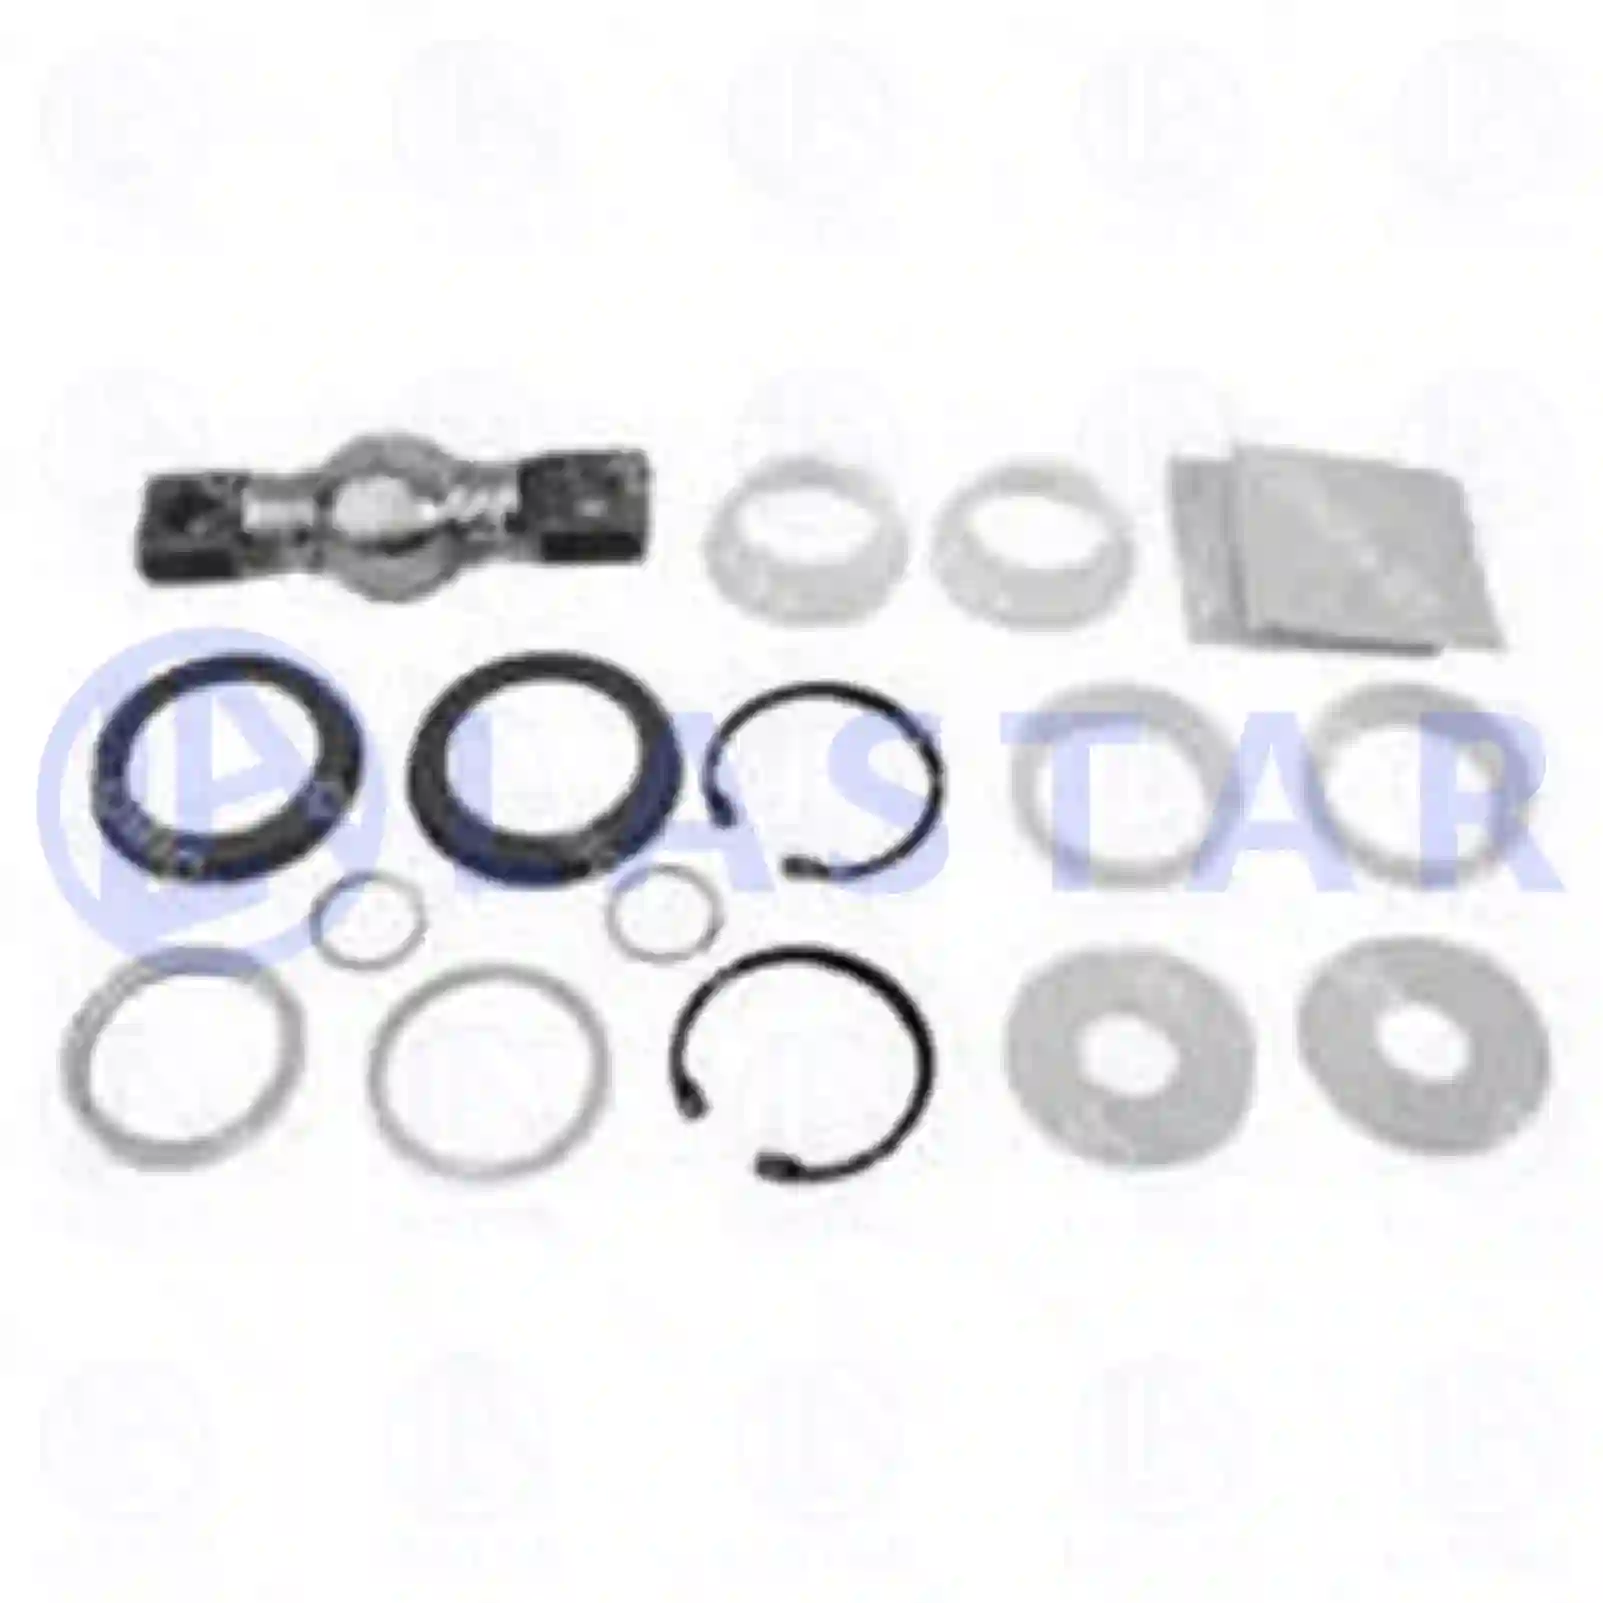 Repair kit, reaction rod / v-stay, 77728408, 0693778, 693778, 0003500213, 0003500305, 0003500505, 0005861433 ||  77728408 Lastar Spare Part | Truck Spare Parts, Auotomotive Spare Parts Repair kit, reaction rod / v-stay, 77728408, 0693778, 693778, 0003500213, 0003500305, 0003500505, 0005861433 ||  77728408 Lastar Spare Part | Truck Spare Parts, Auotomotive Spare Parts